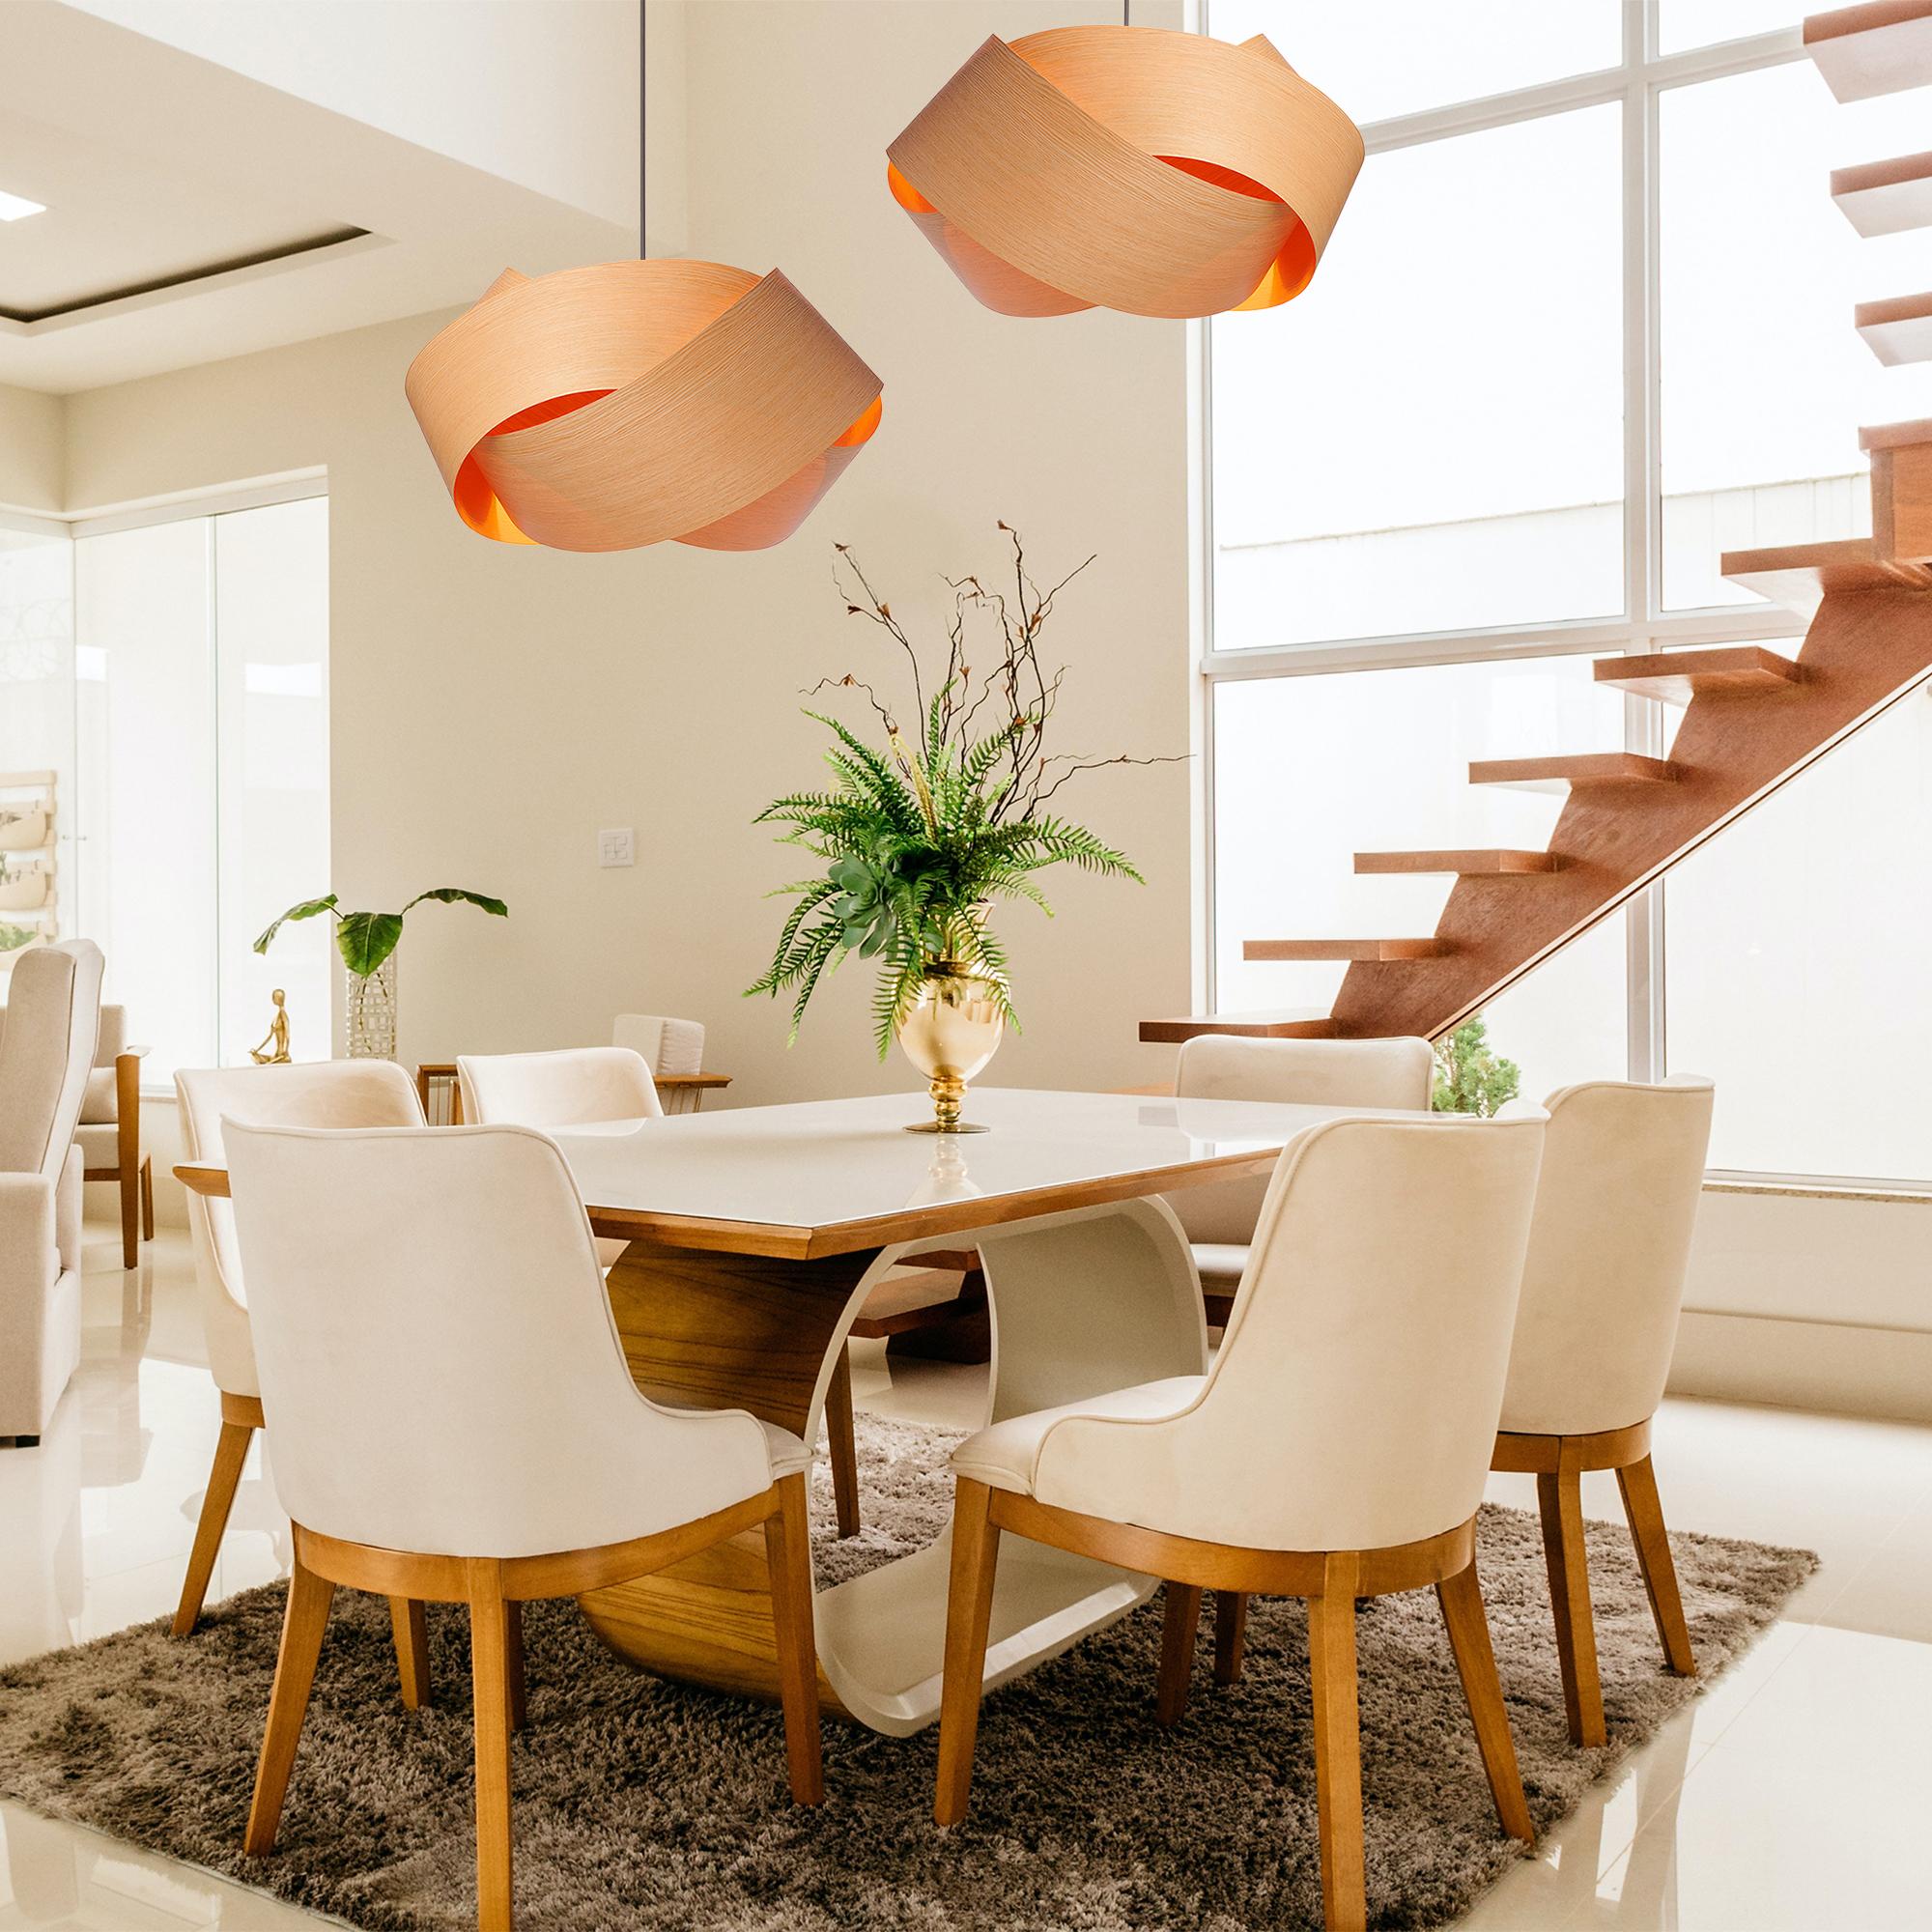 The Serene pendant light is a contemporary, Mid-Century Modern light fixture with a Scandinavian design and organic modern composition. This minimalist luxury white oak wood veneer pendant design is the perfect way to add a touch of nature and